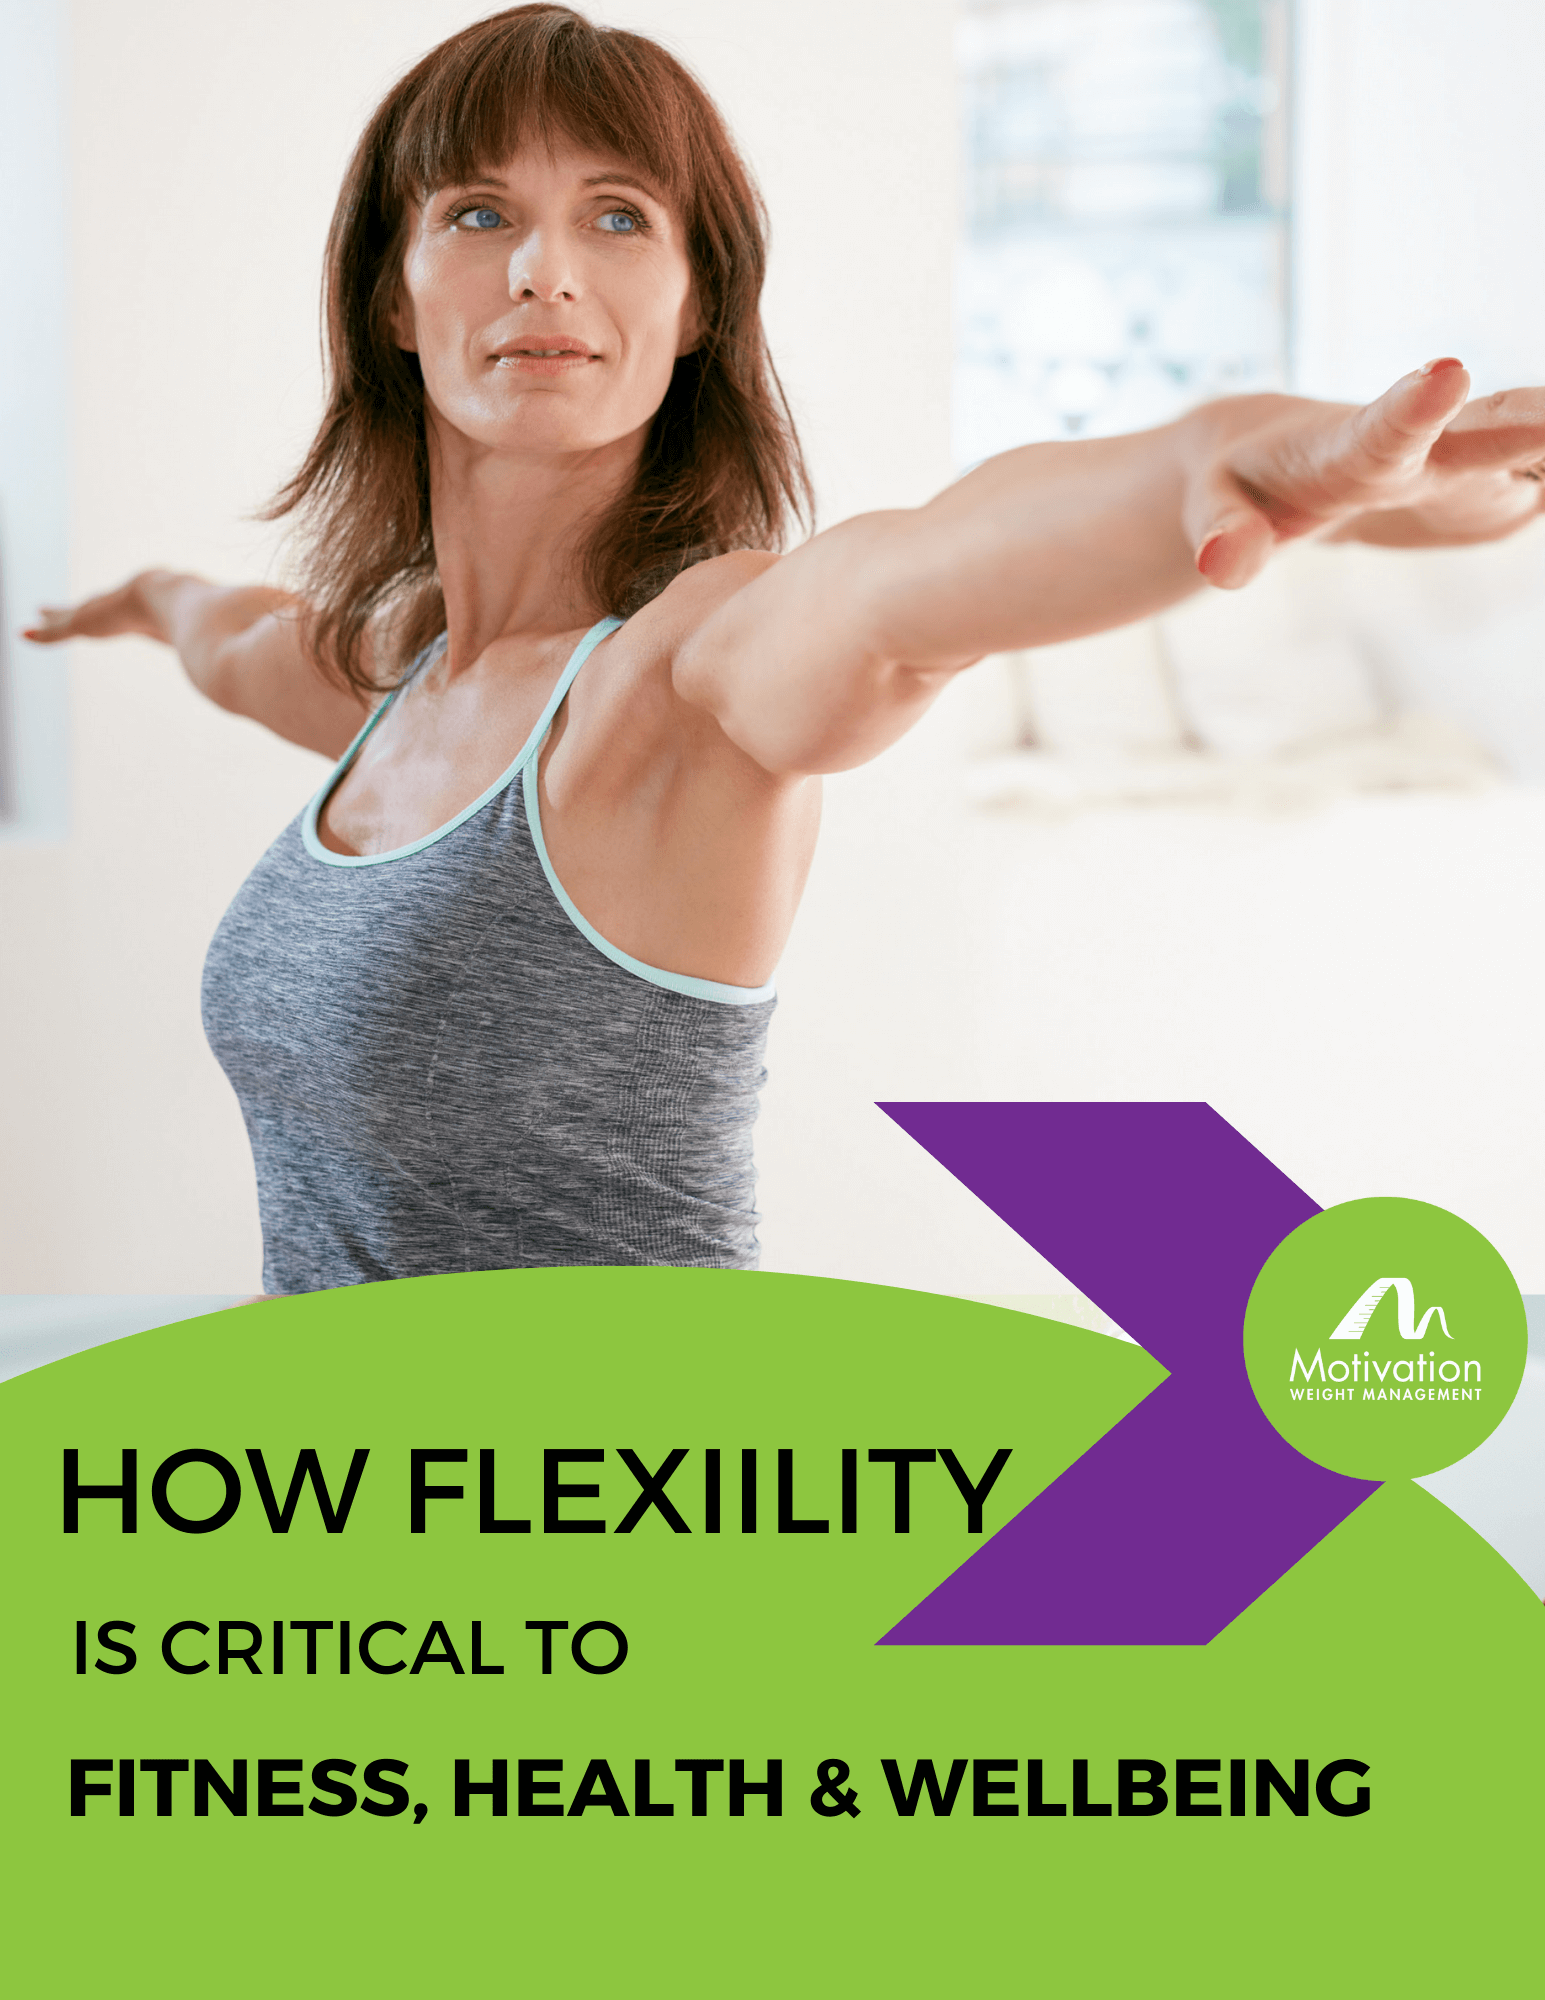 How Is Flexibility Critical To Fitness, Health And Wellbeing